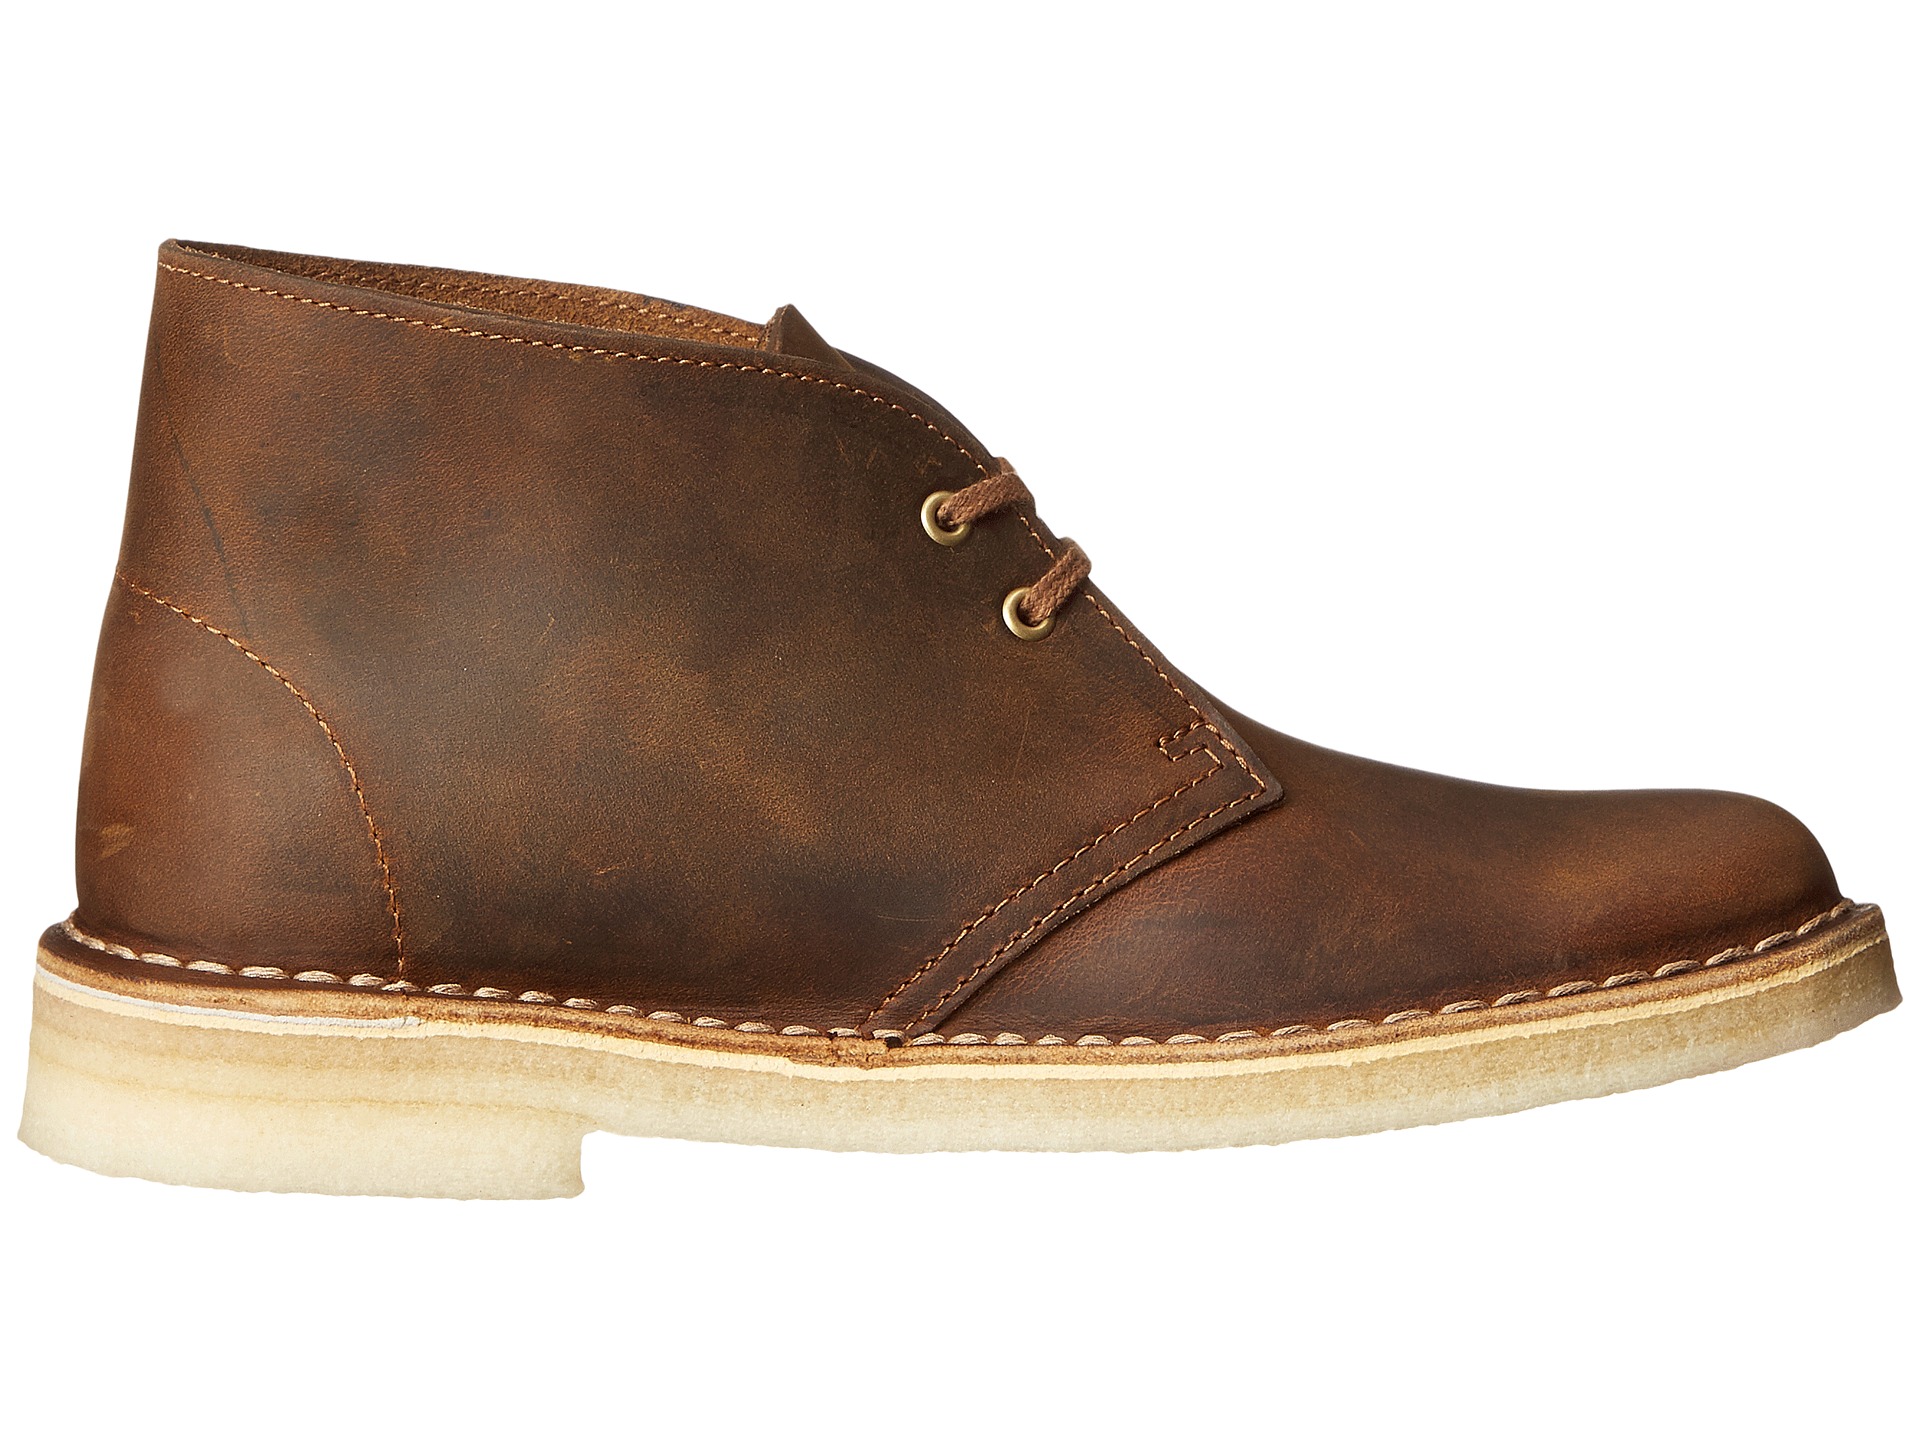 Clarks Desert Boot Beeswax Leather 2 - Zappos.com Free Shipping BOTH Ways